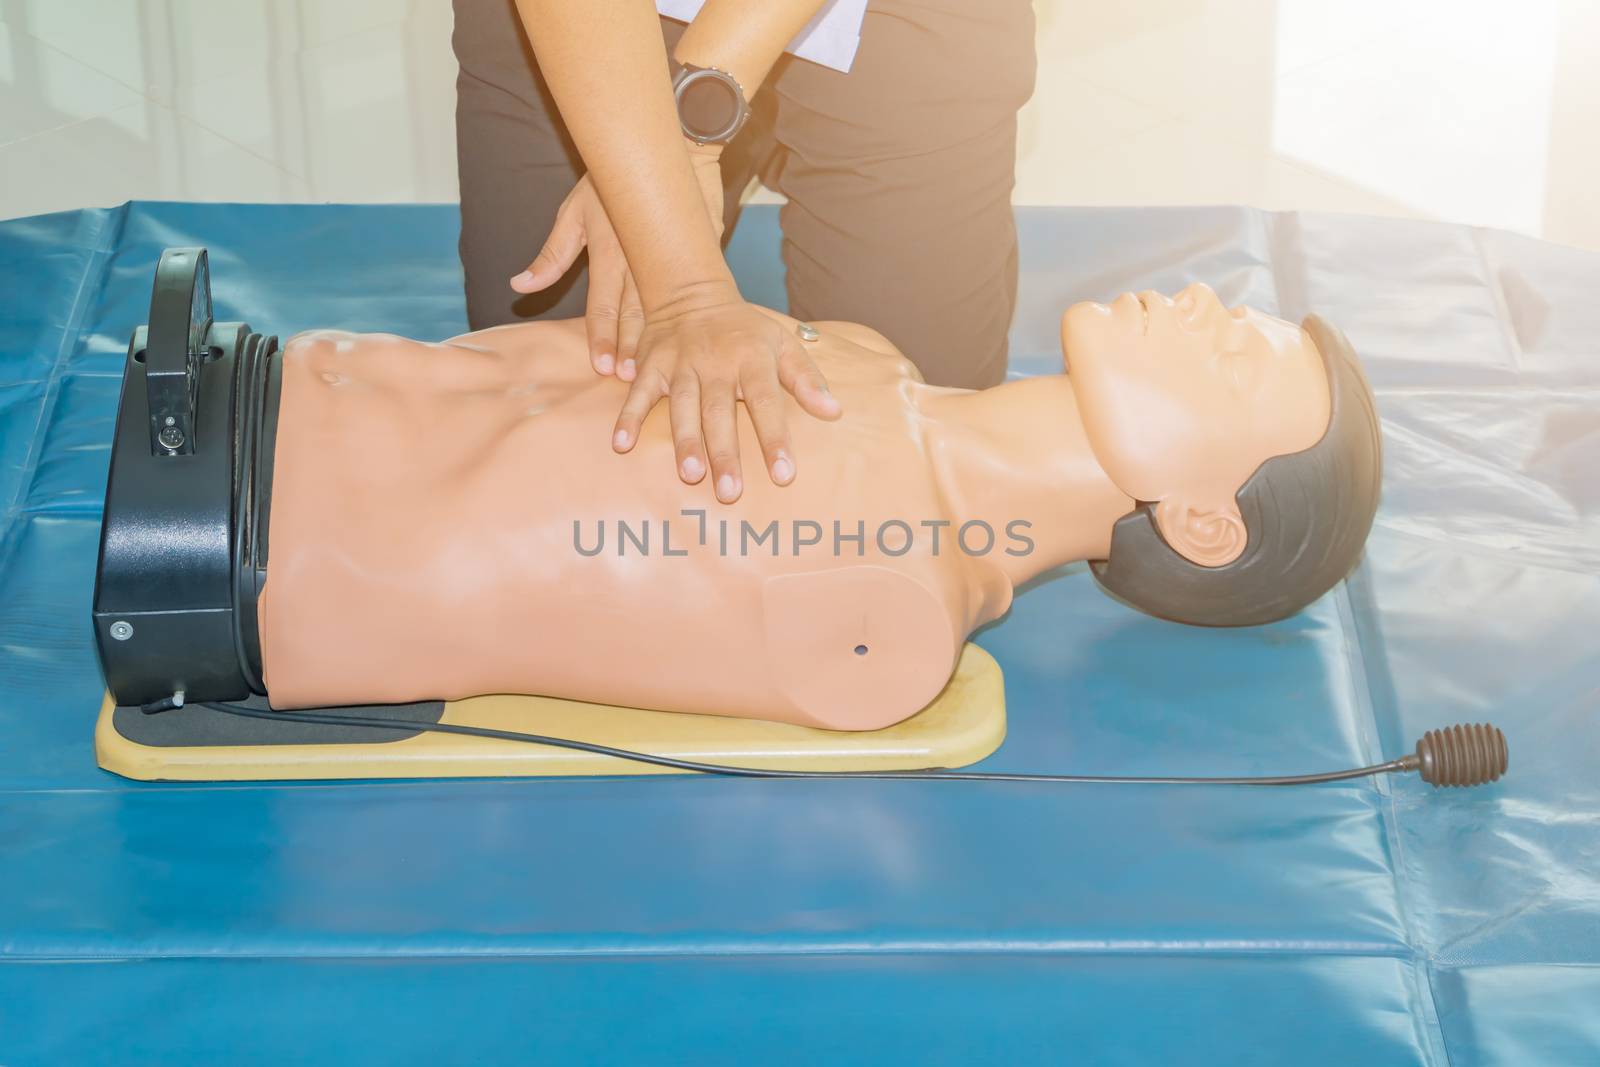 CPR aid dummy medical training with hand press Heart by pramot